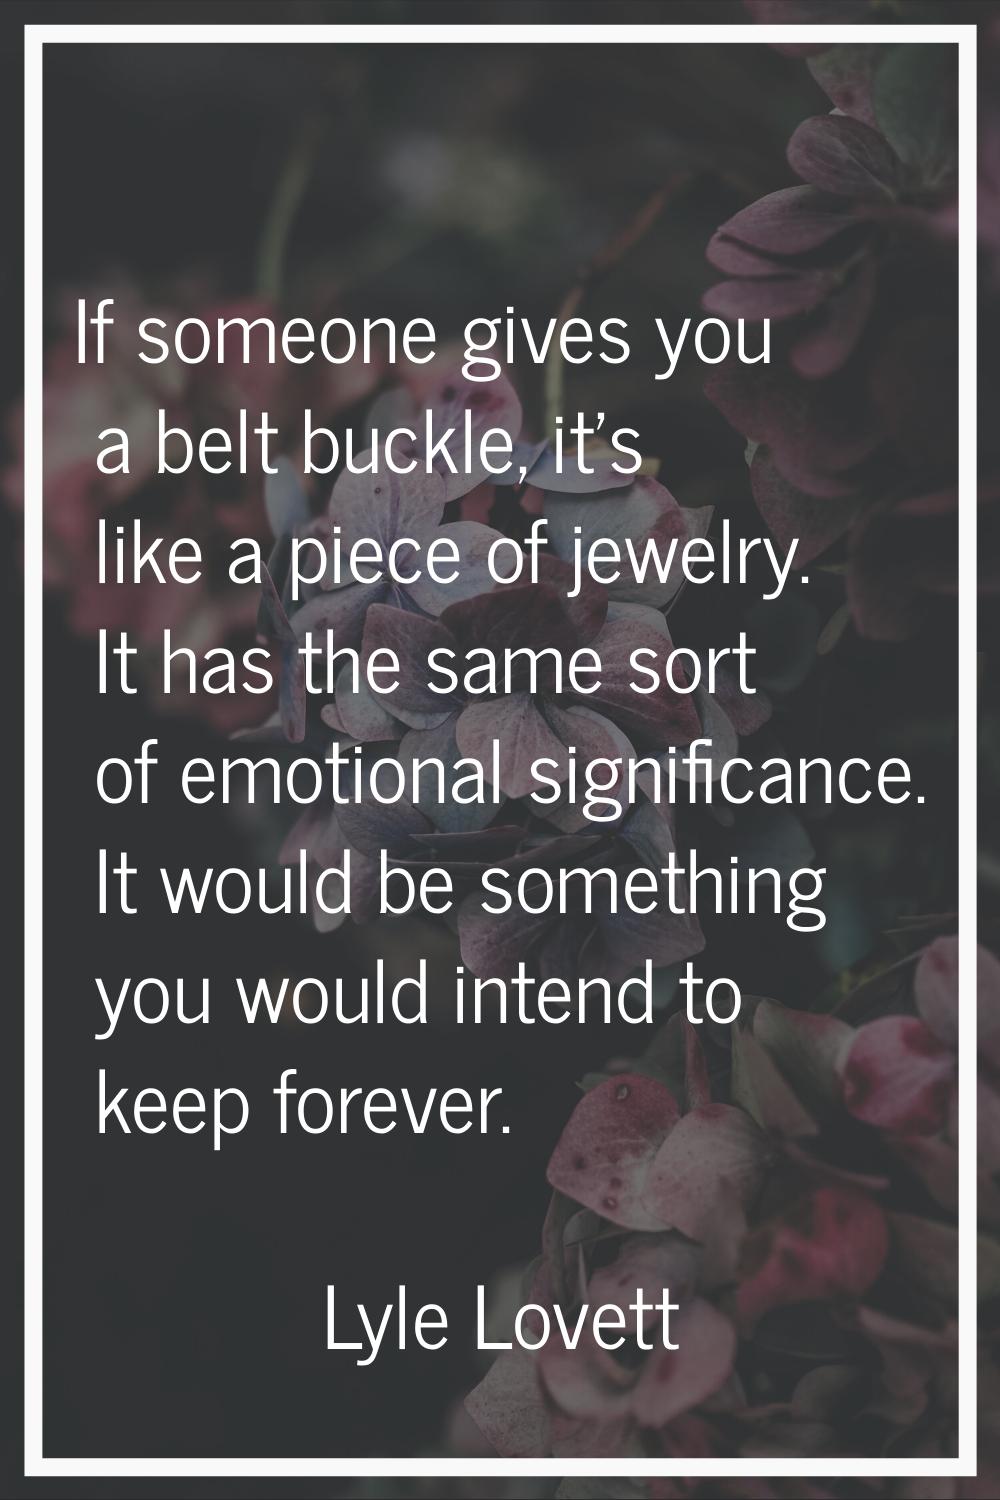 If someone gives you a belt buckle, it's like a piece of jewelry. It has the same sort of emotional